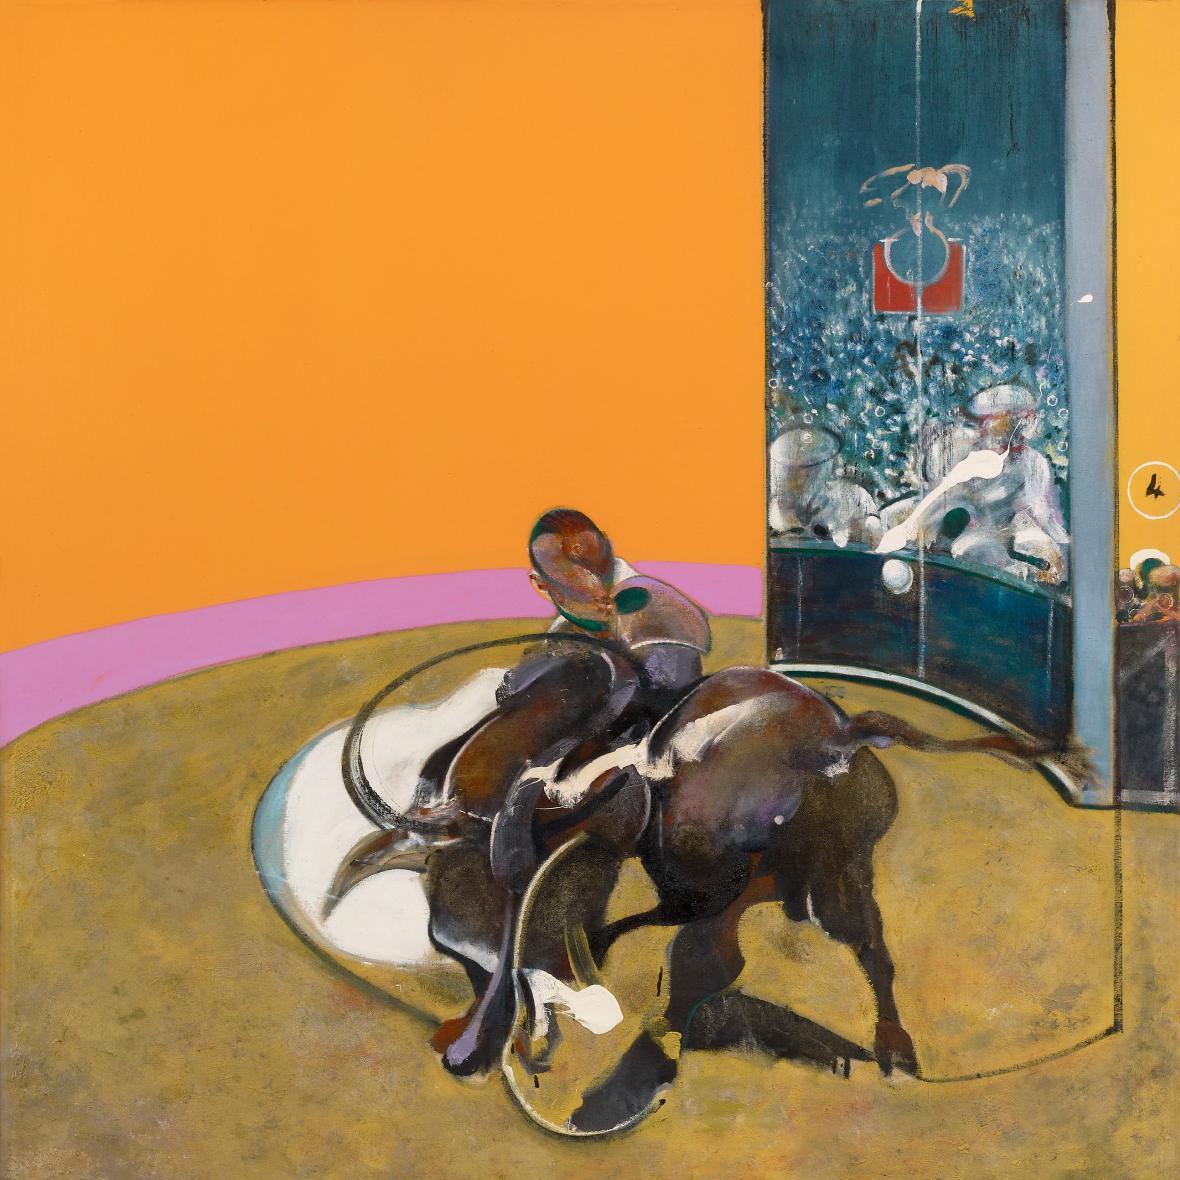 "Francis Bacon: Man and Beast" at Royal Academy in London  - Exhibitions